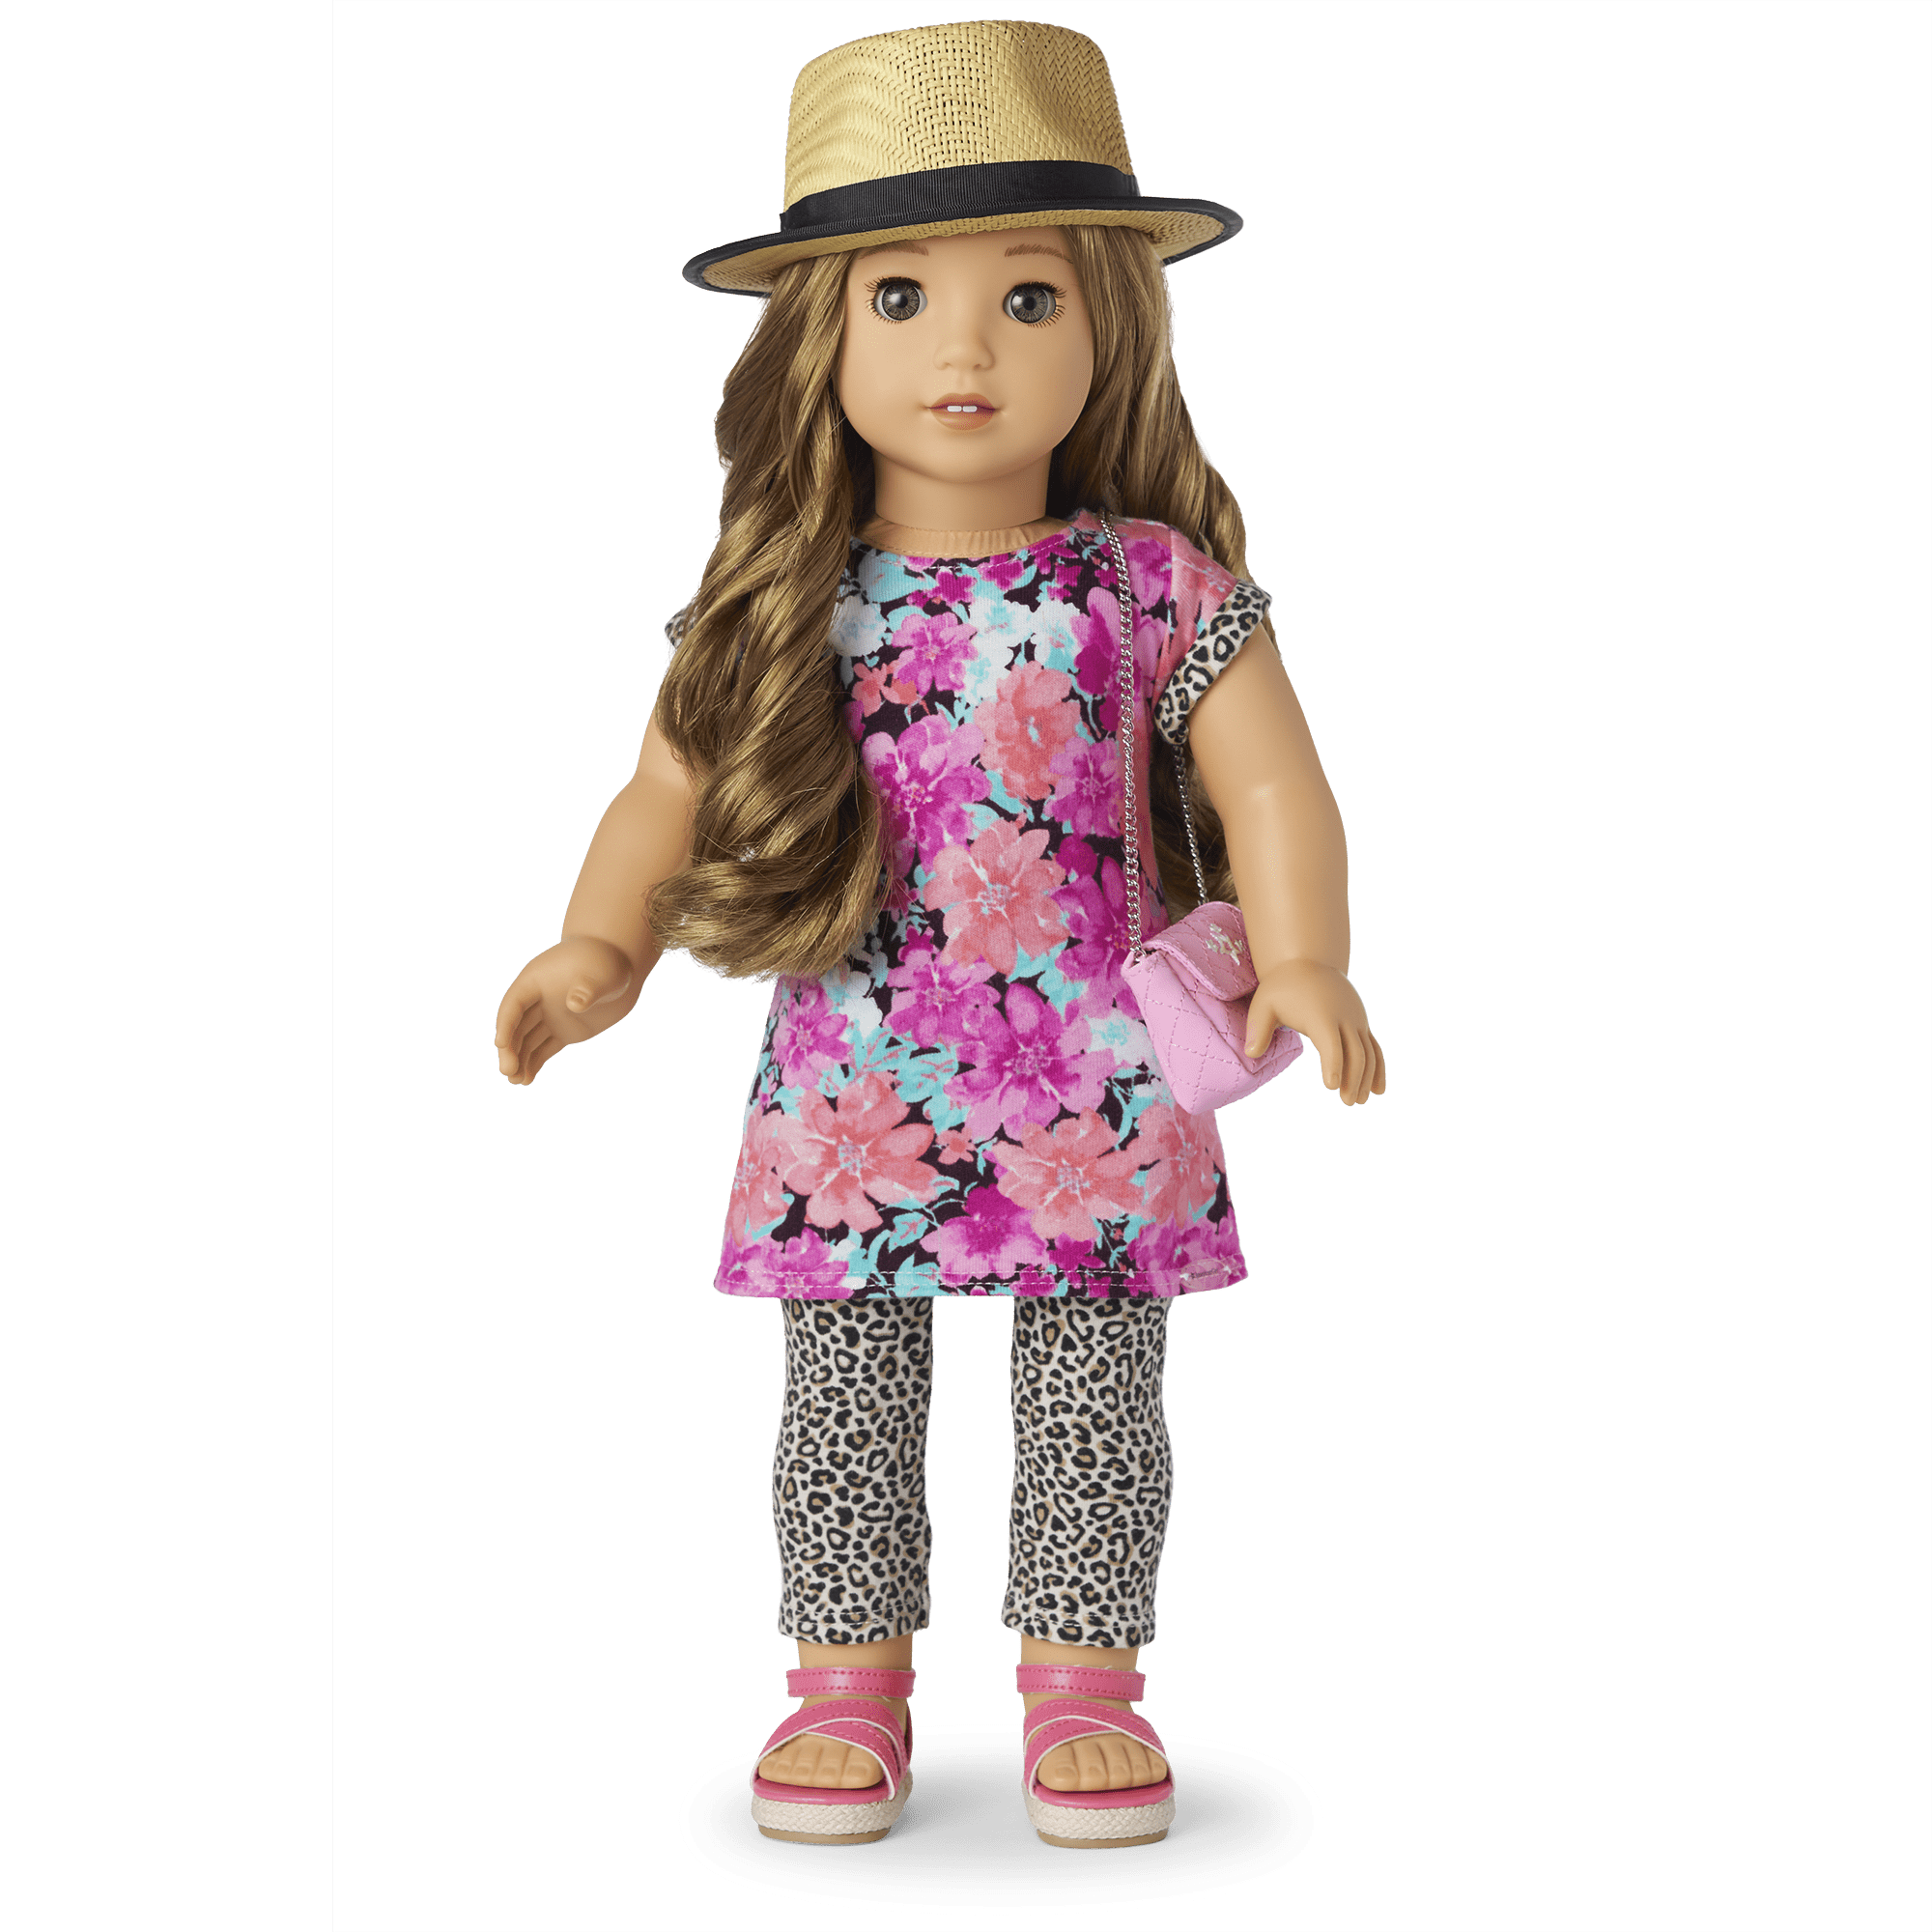 Show Your Sweet Side Outfit & Accessories for 18-inch Dolls